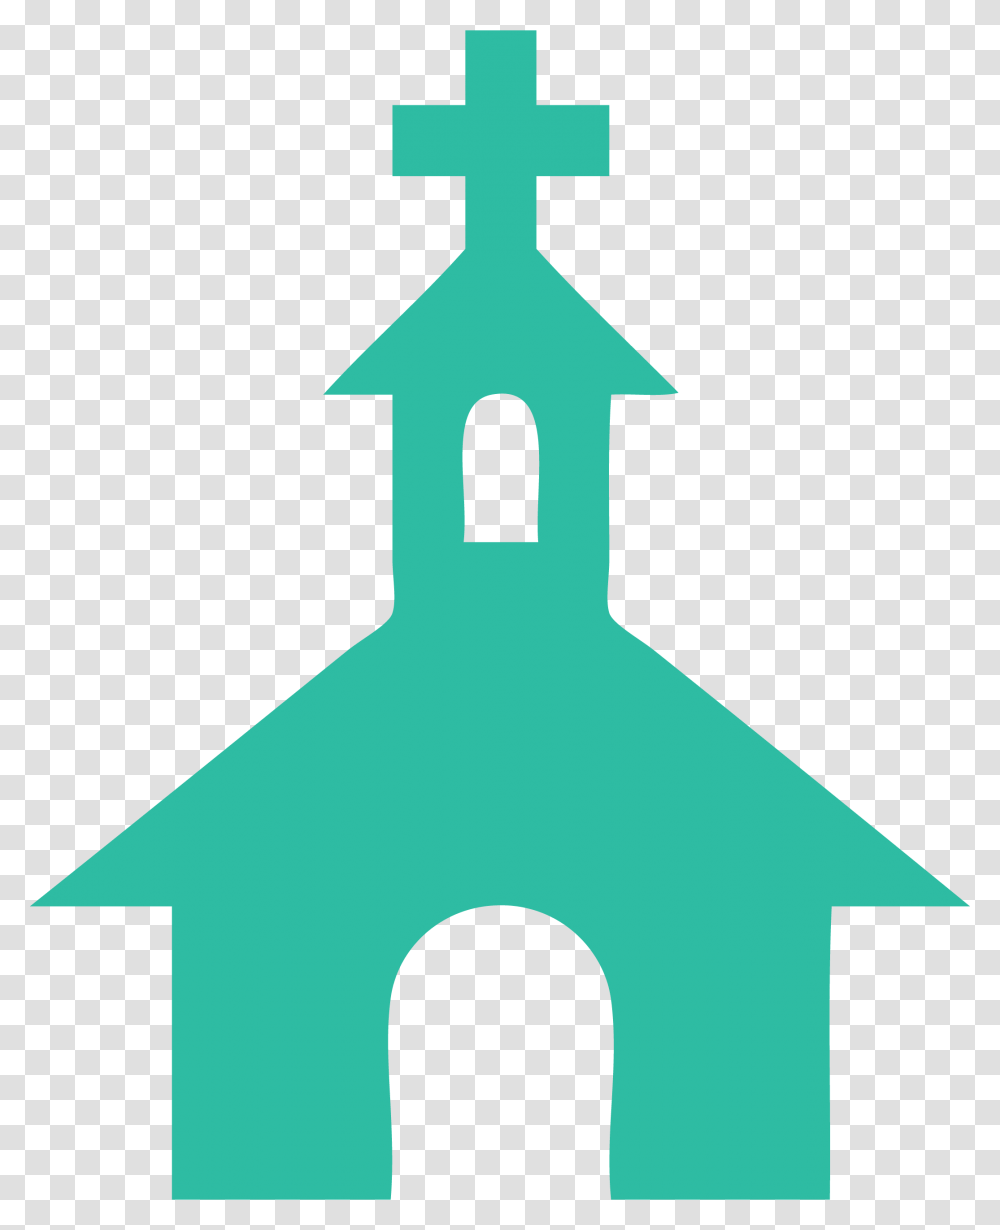 Crucifixion Of Jesus Clipart Church Symbol On Map, Cross, Triangle, Hanger, Star Symbol Transparent Png